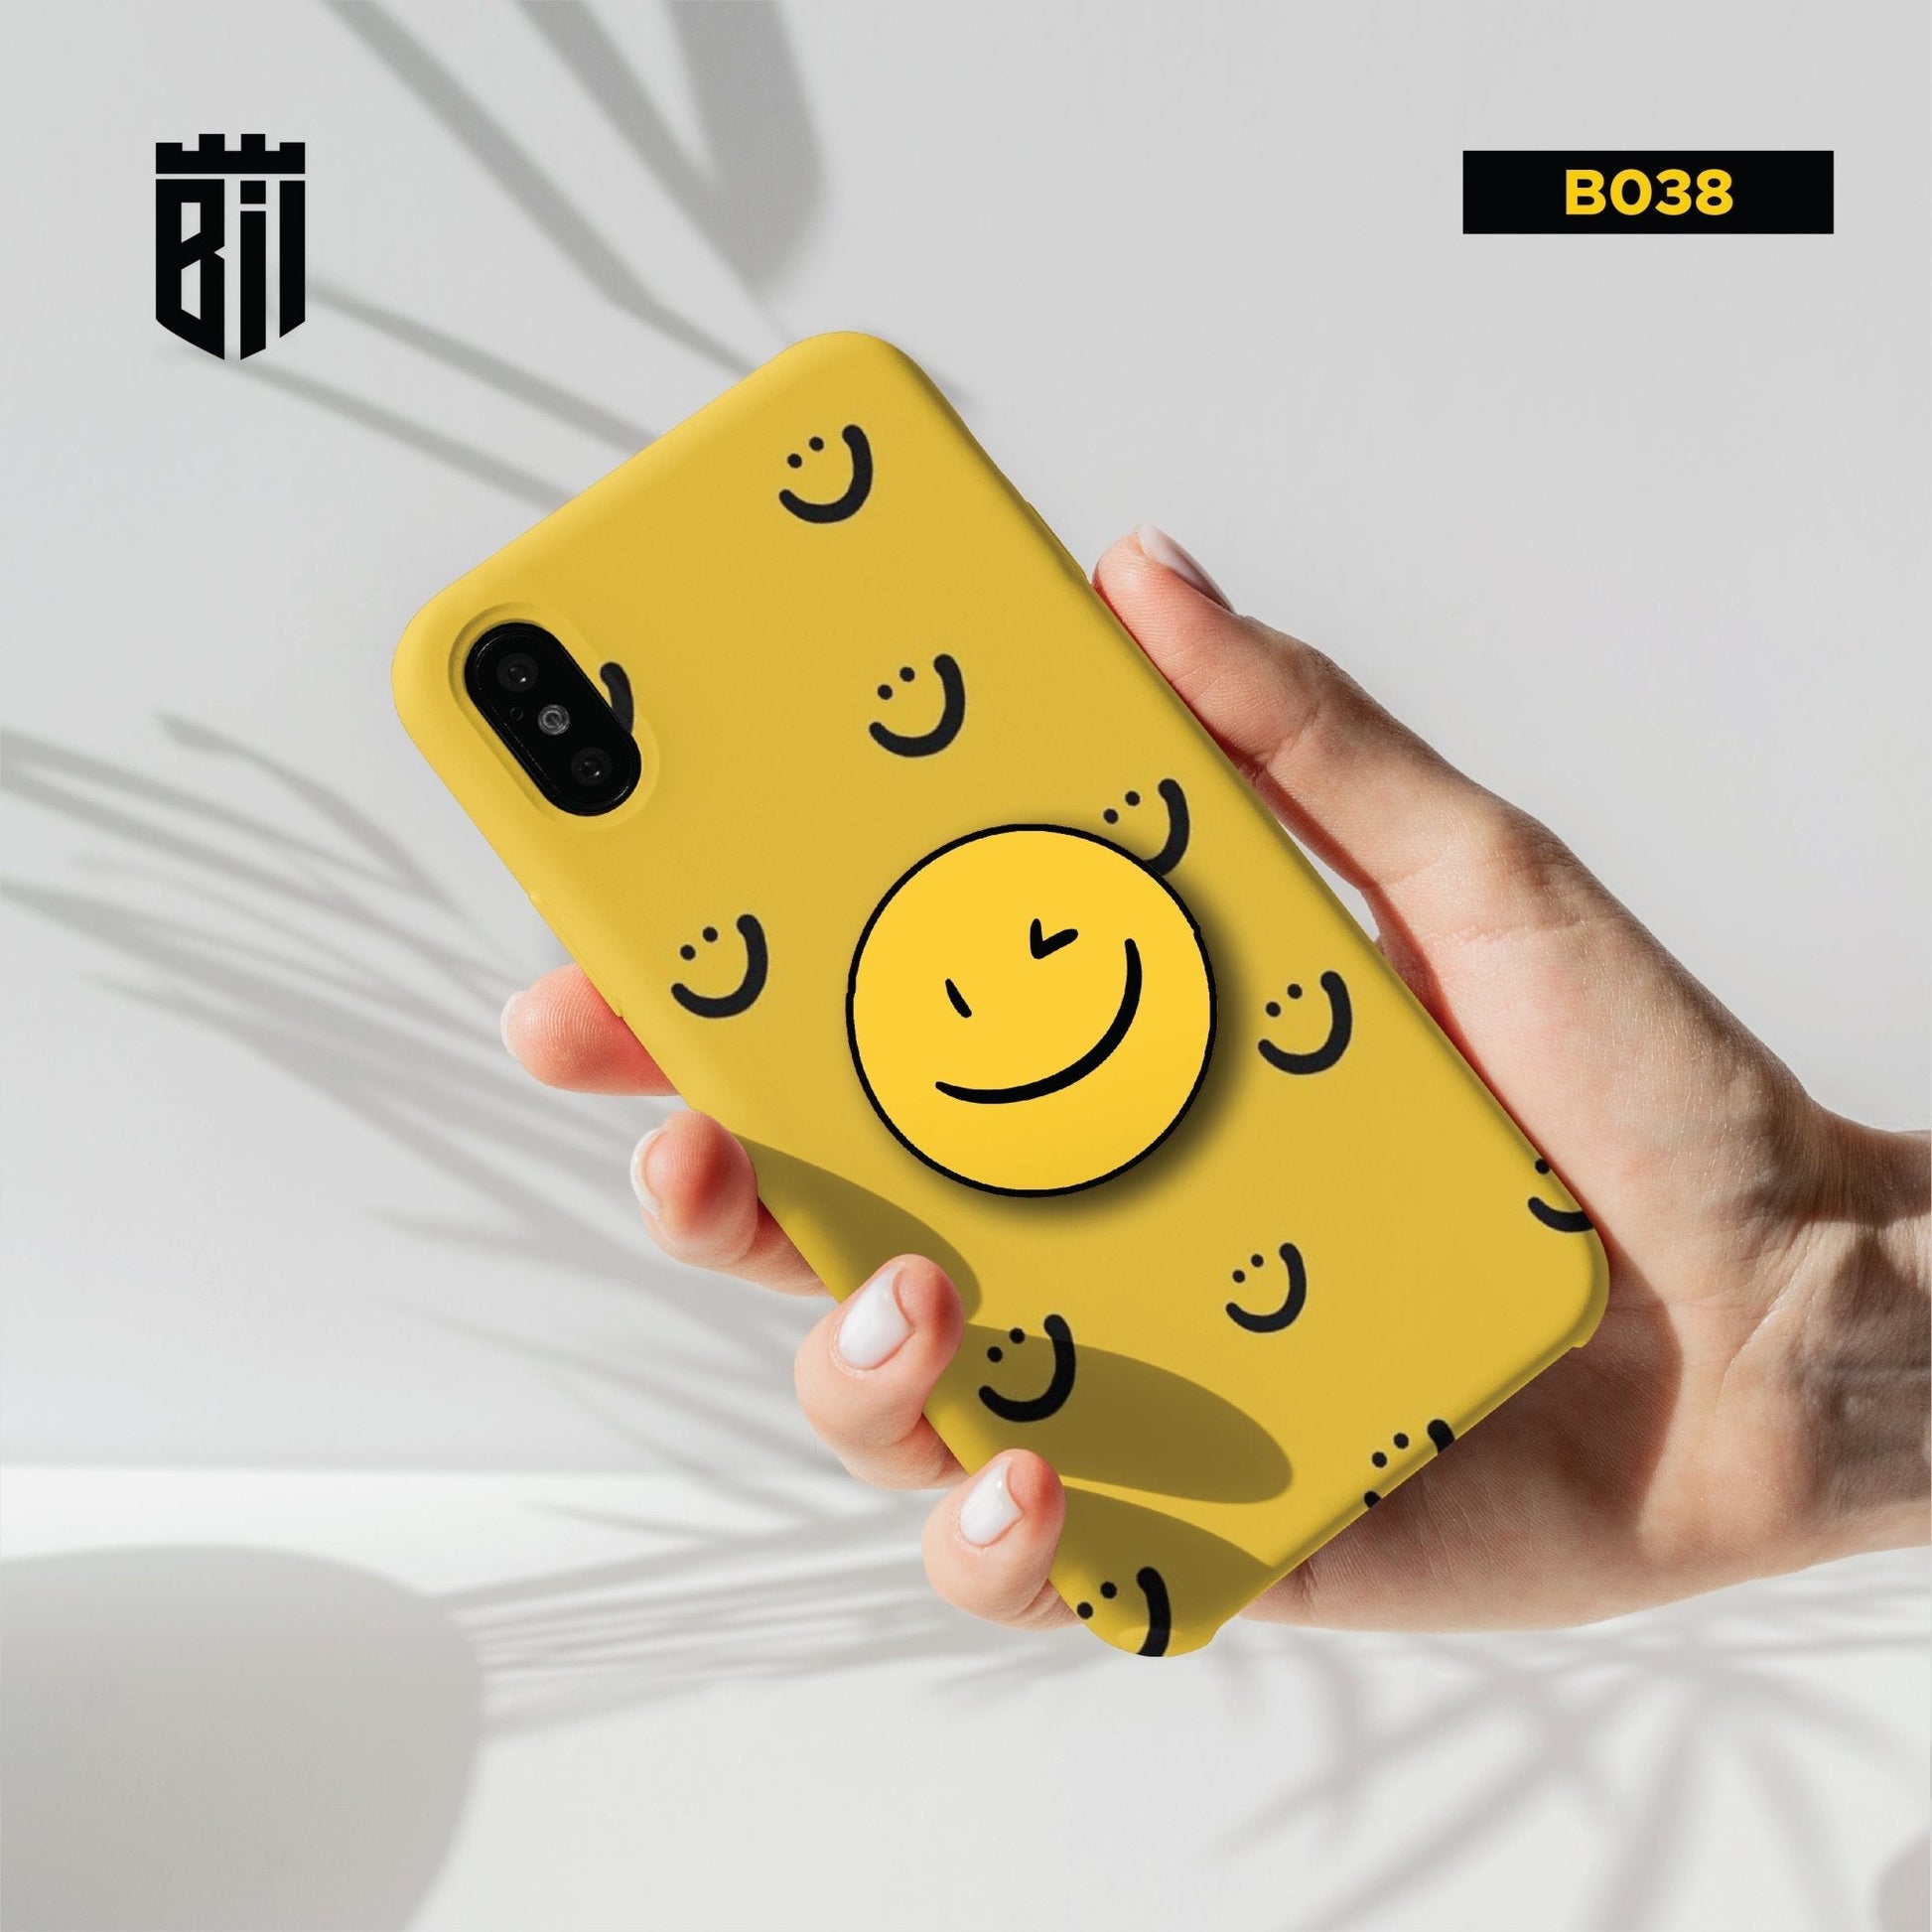 B038 Yellow Smiley Mobile Case with Popsocket - BREACHIT